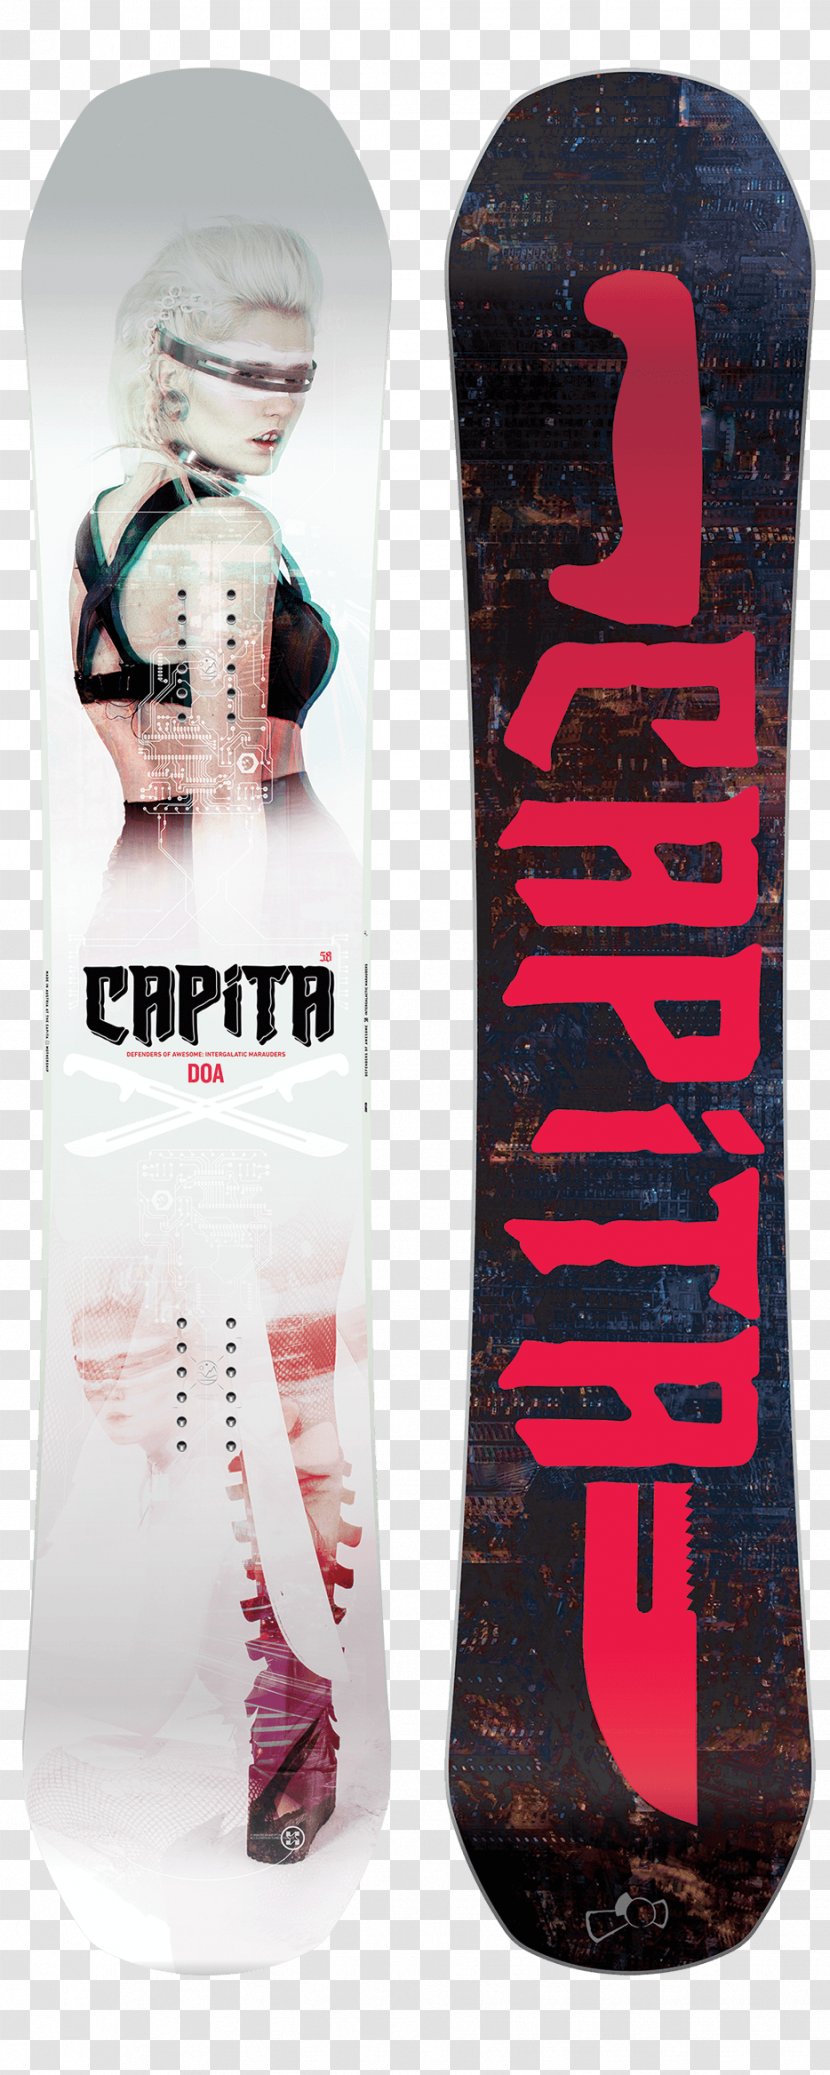 CAPiTA Defenders Of Awesome (2017) Snowboard (2016) 0 - Burton Snowboards Transparent PNG